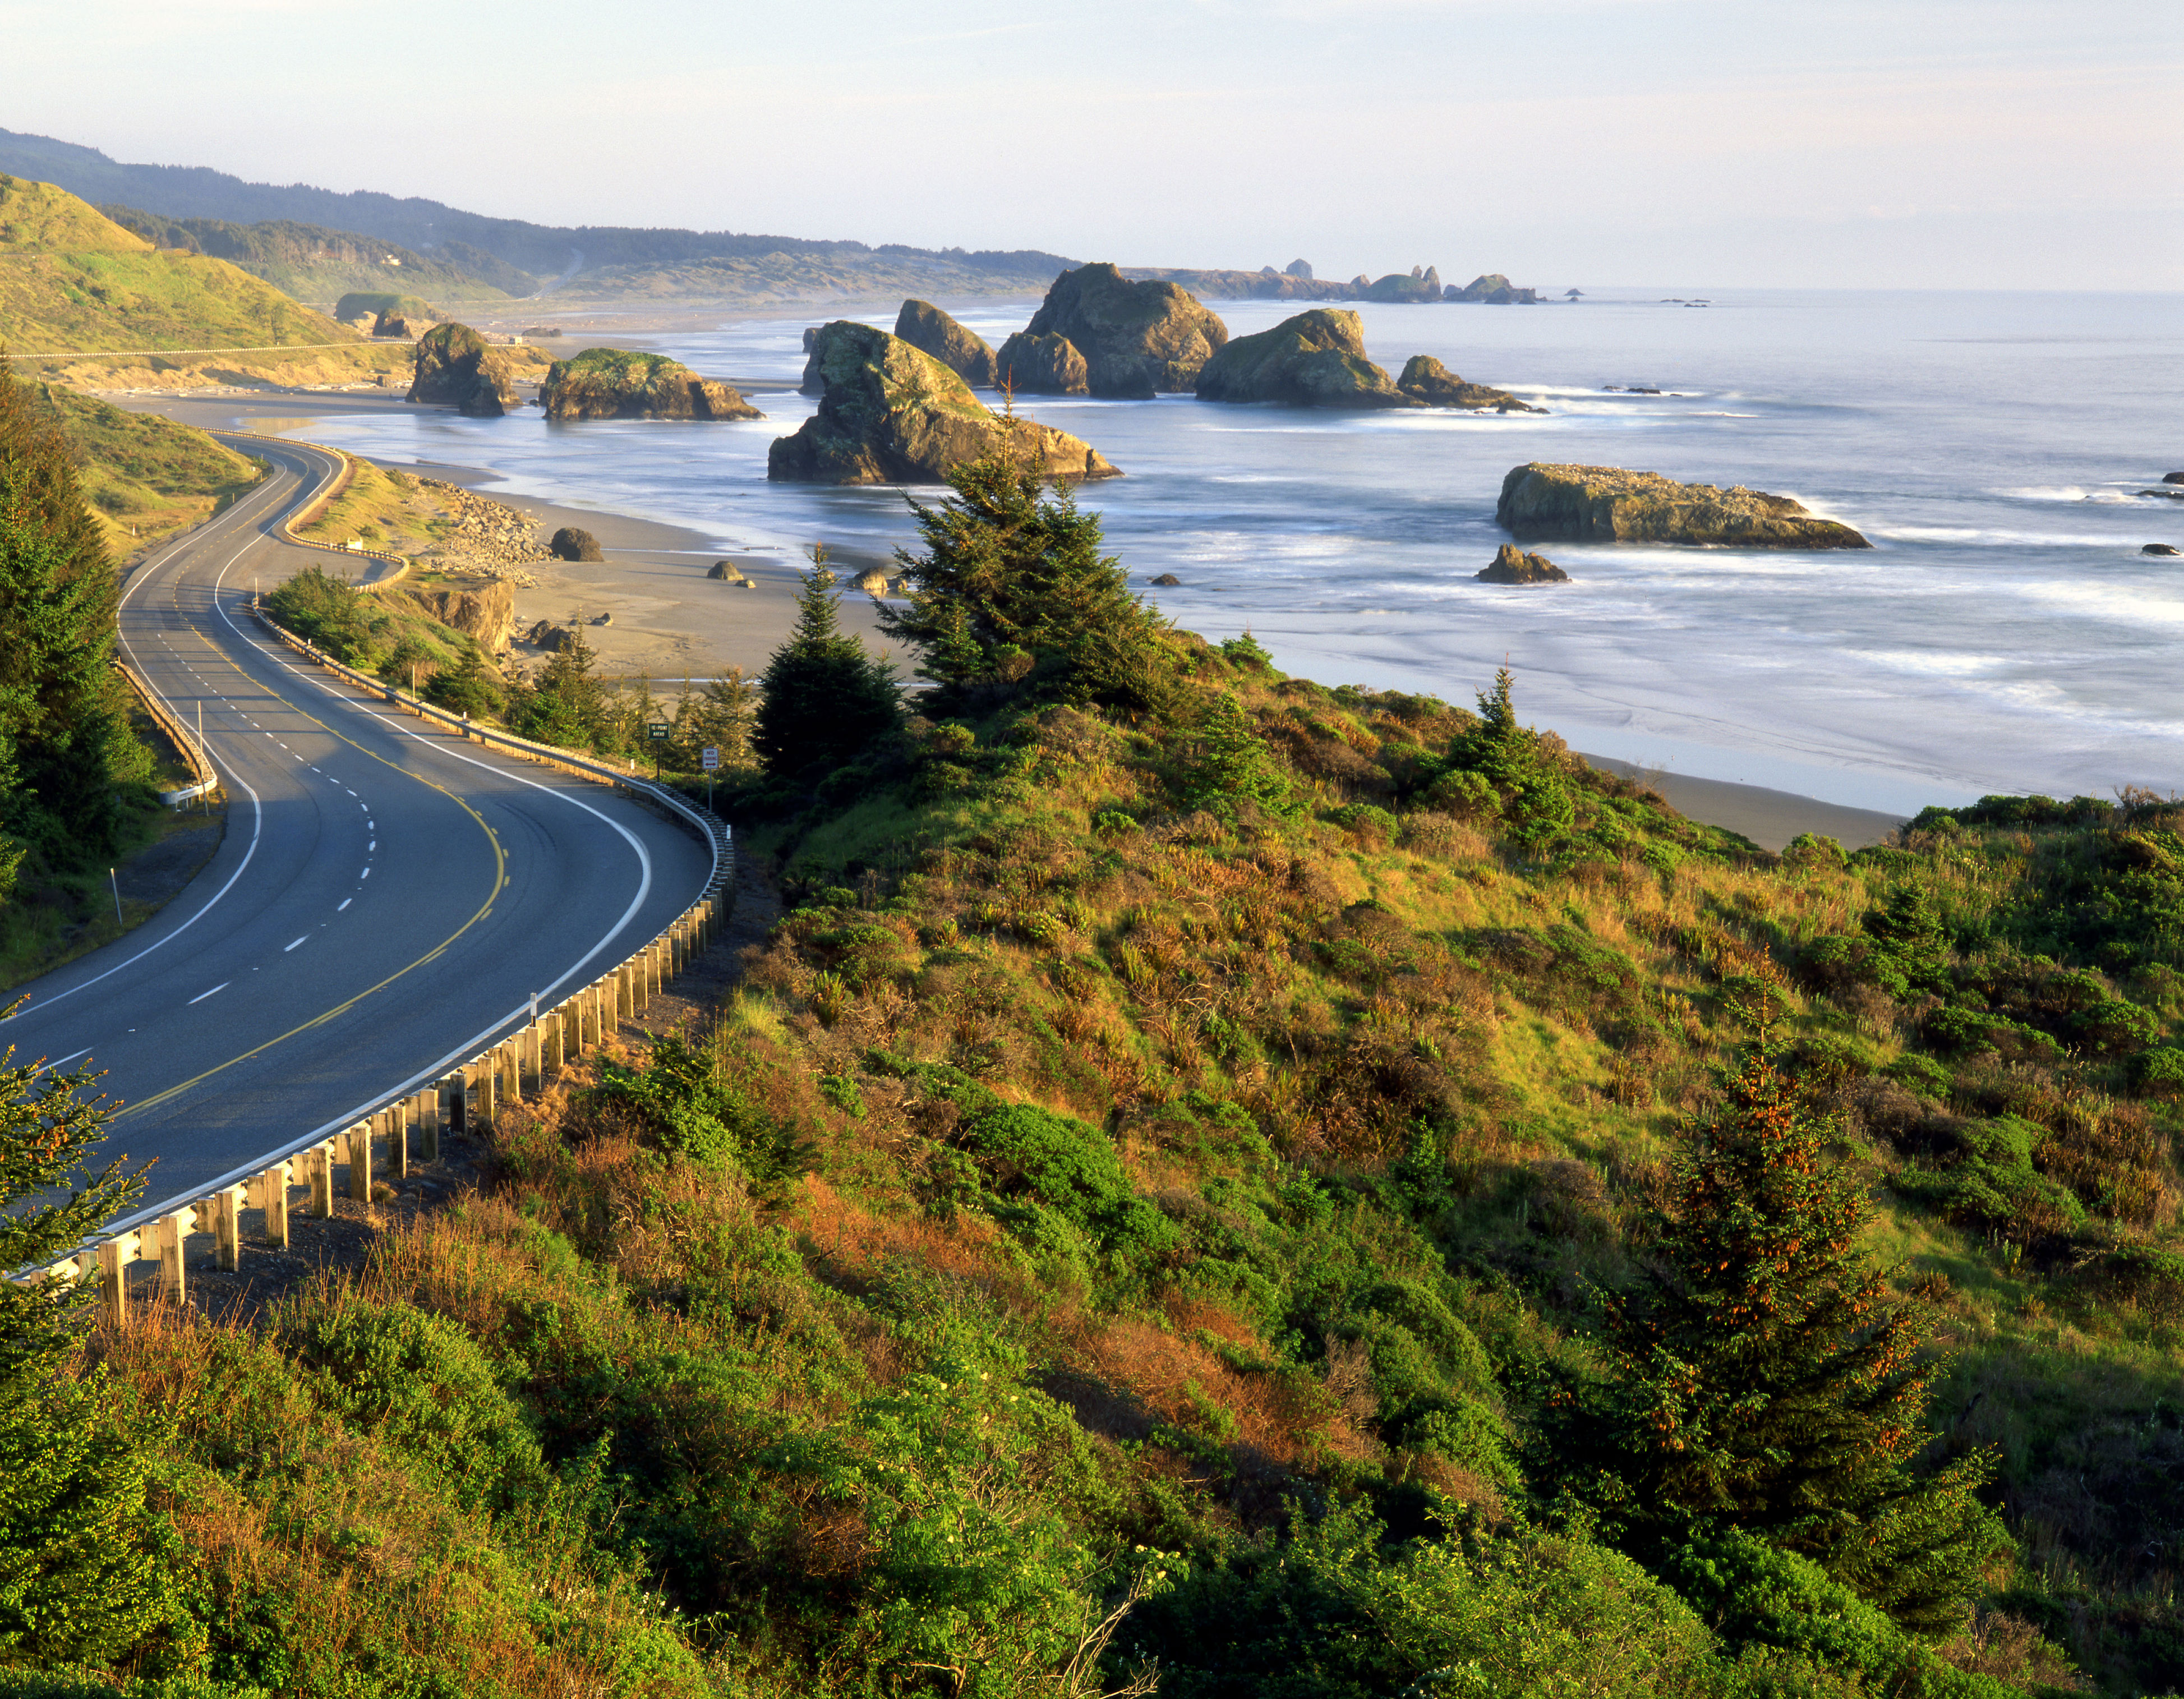 <p>Ah, yes–the great American <a href="https://www.cntraveler.com/gallery/best-road-trips-in-the-world?mbid=synd_msn_rss&utm_source=msn&utm_medium=syndication">road trip</a>. Clichés aside, there’s something about the magnetic pull of “the open road” that attracts all types of travelers to embark on this time-honored pilgrimage across the US. Whether it’s the boundless sense of free rein, the quiet hours of meditative self revelation, or the transfixing power of staring out the <a href="https://www.cntraveler.com/story/how-to-rent-a-car-and-avoid-extra-fees?mbid=synd_msn_rss&utm_source=msn&utm_medium=syndication">(rental) car</a> window–road trips can be some of our most transformative travel experiences, particularly in a country as vast and diverse as the United States.</p> <p>For many, however, the open road can be as intimidating as it is alluring. To help, we’ve pulled together 17 of the best US road trip ideas to inspire your next journey, whether it's to the <a href="https://www.cntraveler.com/gallery/the-best-east-coast-road-trips?mbid=synd_msn_rss&utm_source=msn&utm_medium=syndication">East Coast</a>, <a href="https://www.cntraveler.com/gallery/best-west-coast-road-trips?mbid=synd_msn_rss&utm_source=msn&utm_medium=syndication">West Coast</a>, or the many <a href="https://www.cntraveler.com/galleries/2015-04-03/america-best-national-park-road-trips-yellowstone-shenandoah-redwood?mbid=synd_msn_rss&utm_source=msn&utm_medium=syndication">national parks</a> in between. Keep reading for the best places to stop, where to stay, and what you’ll see along the way for each route. All you’ll need to supply is a car and a killer playlist.</p><p>Sign up to receive the latest news, expert tips, and inspiration on all things travel</p><a href="https://www.cntraveler.com/newsletter/the-daily?sourceCode=msnsend">Inspire Me</a>